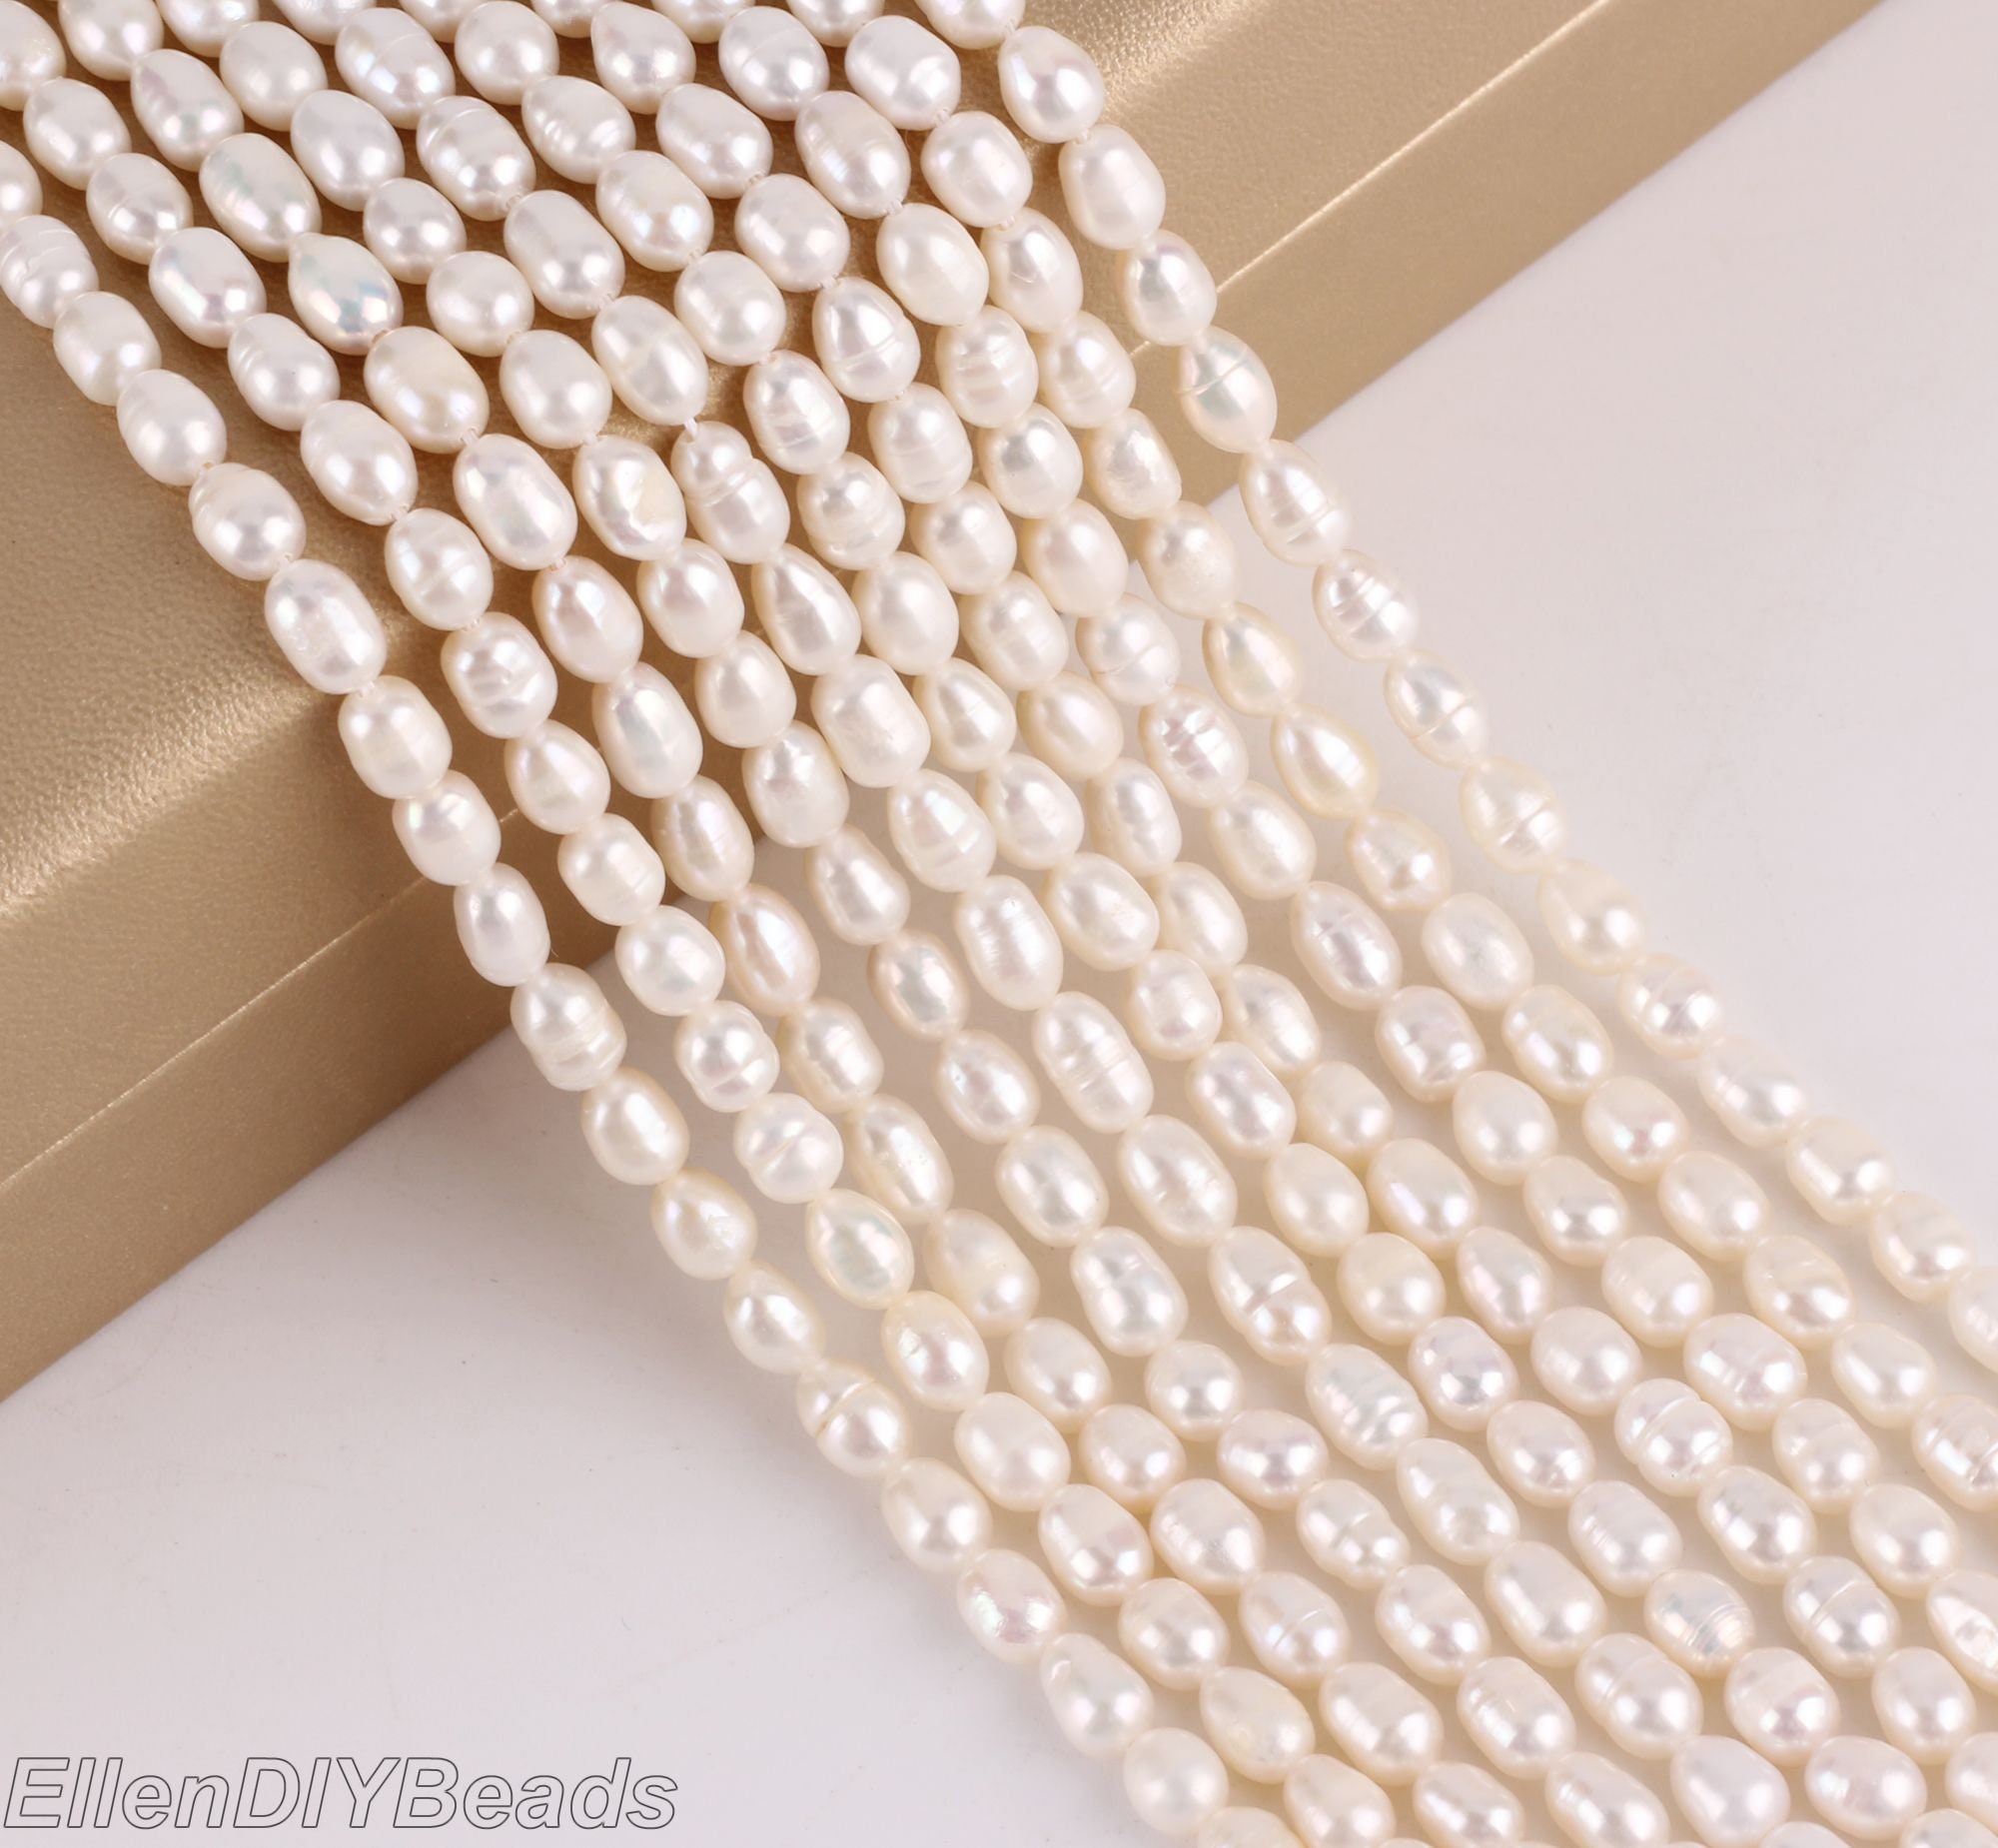 Freshwater Pearl Necklace For Acsergery Women 5-7mm Rice Shaped Pearl  Strands Necklace Gift